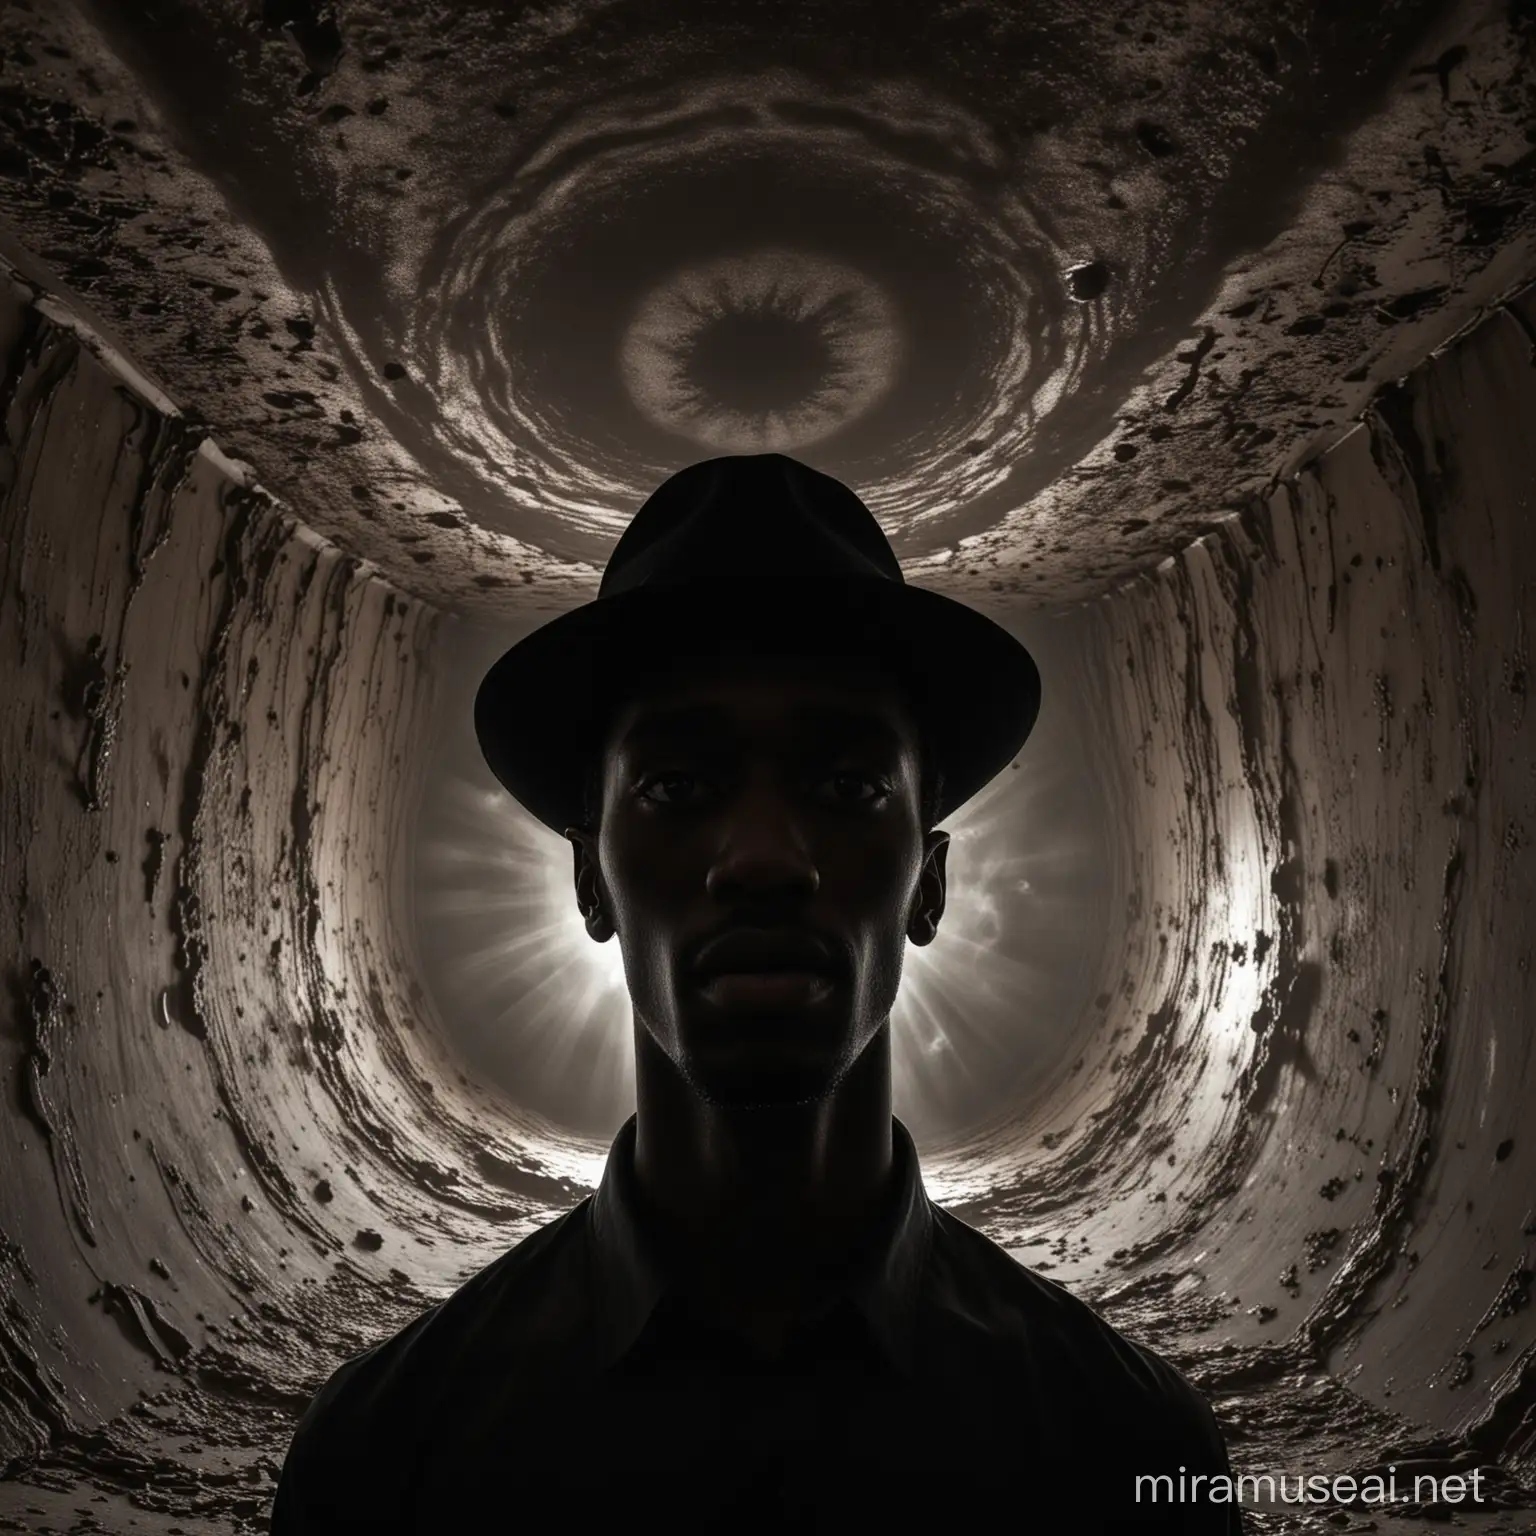 a very skinny black man with a black hat In the center of the image with a fisheye effect, smoked room, seeing from behind, hallucinogen, siluette of the person, the walls is melting, hallucinogenic, trance, brain, chemical, highly detailed, stunning visuals, ultra realistic, eyes is starring from the walls, surreal, hallucinations, trippy